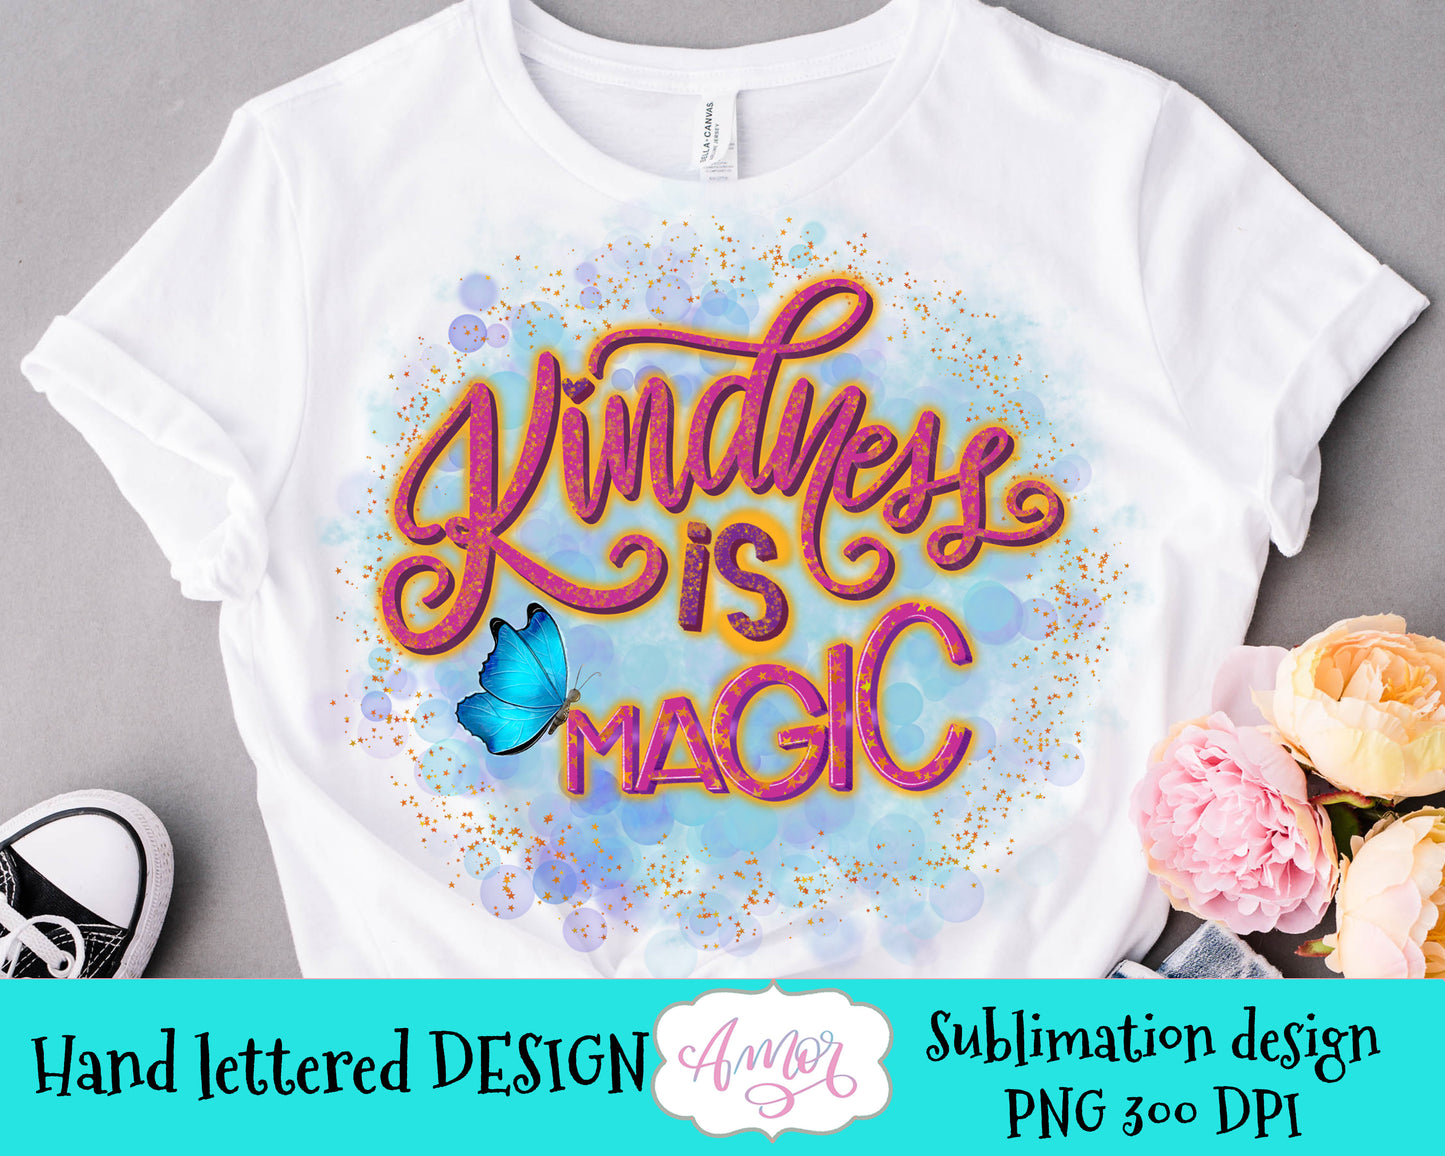 Kindness is Magic Sublimation design for T-shirts